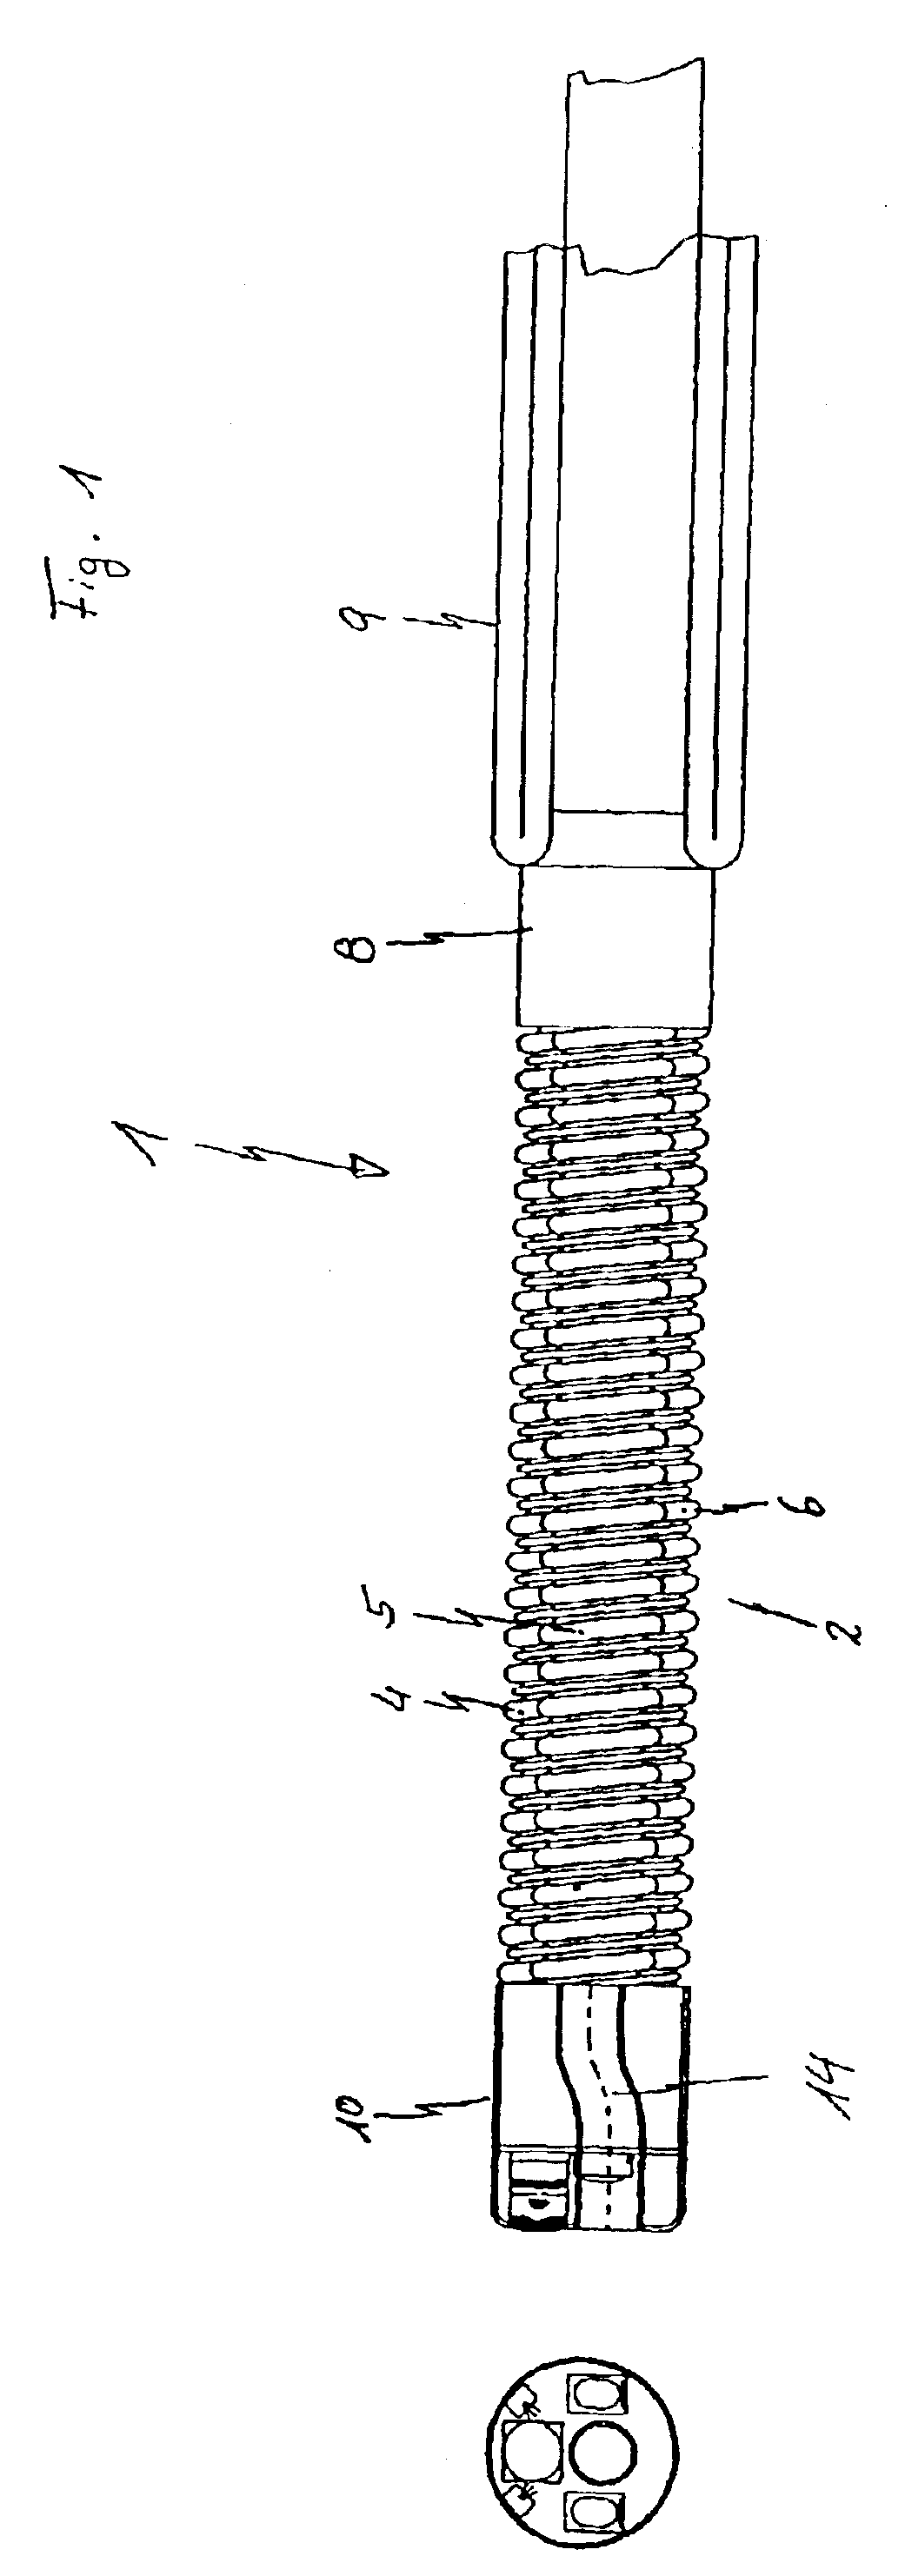 Endoscope shaft comprising a movable end portion